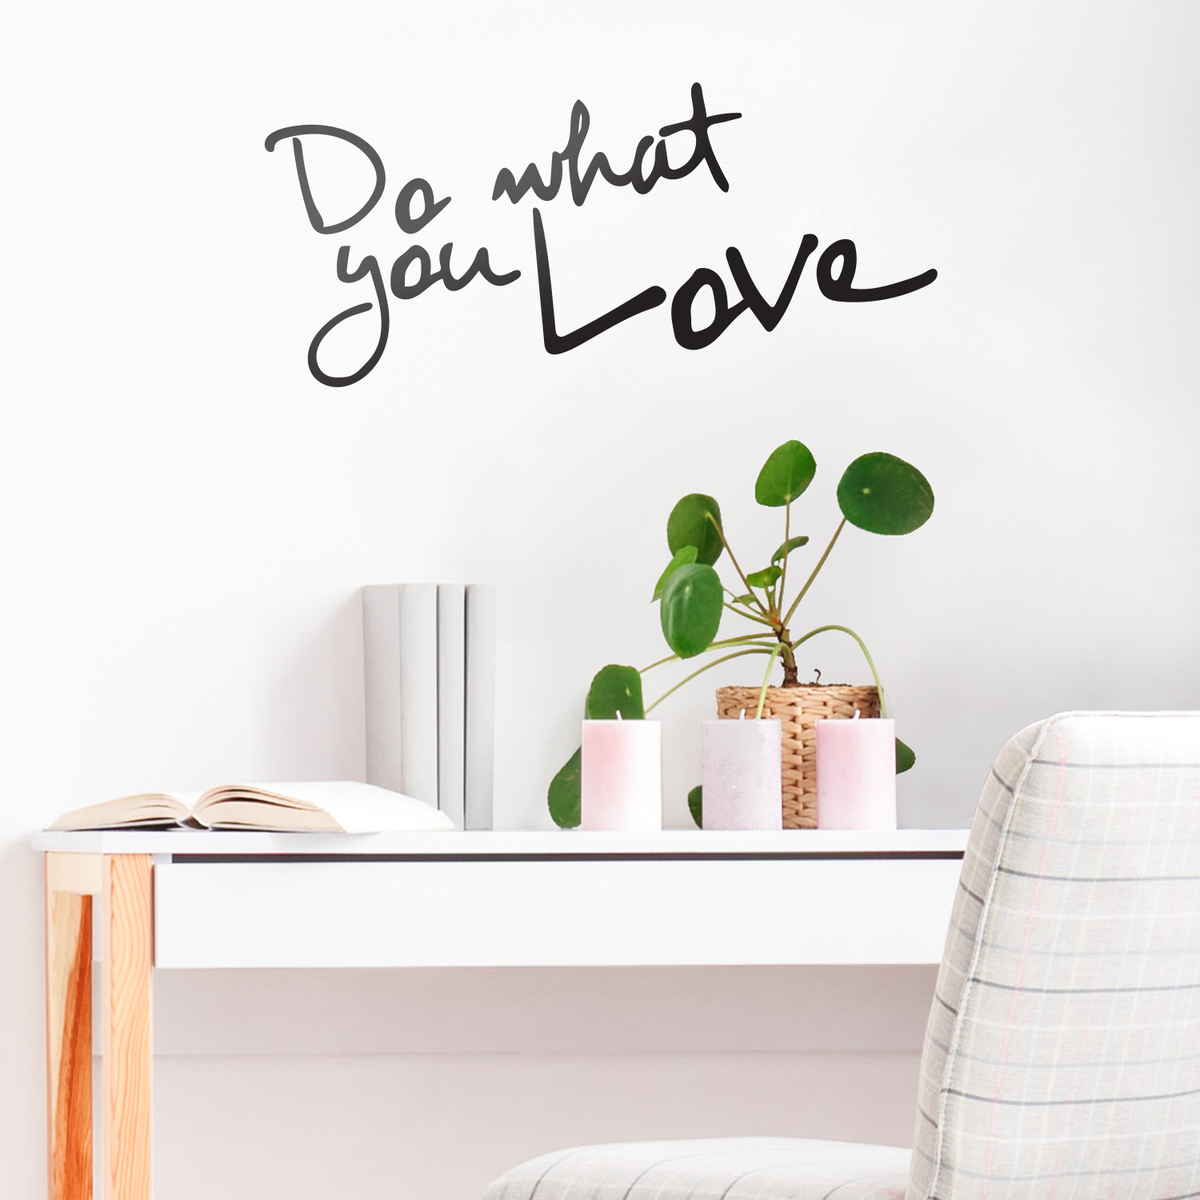 Imprinted You – Love What - Do Art Life Designs Decal Inspirational - Quotes x 30\